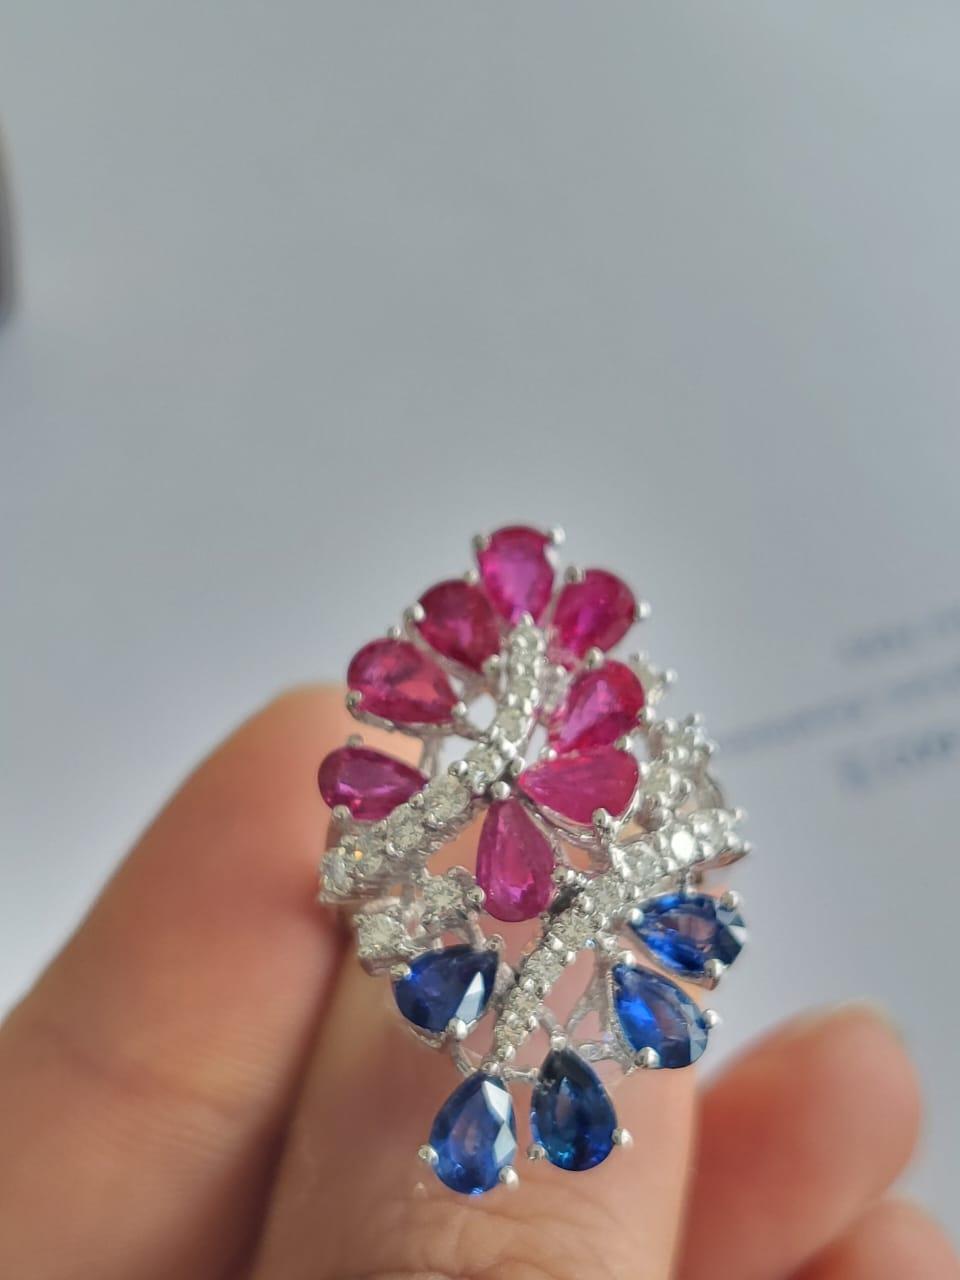 A very gorgeous and beautiful, Ruby & Blue Sapphire Cocktail Ring set in 18K White Gold & Diamonds. The weight of the Ruby is 3.42 carats. The Rubies are of Mozambique origin. The weight of the Blue Sapphires is 3.42 carats. The Blue Sapphires are